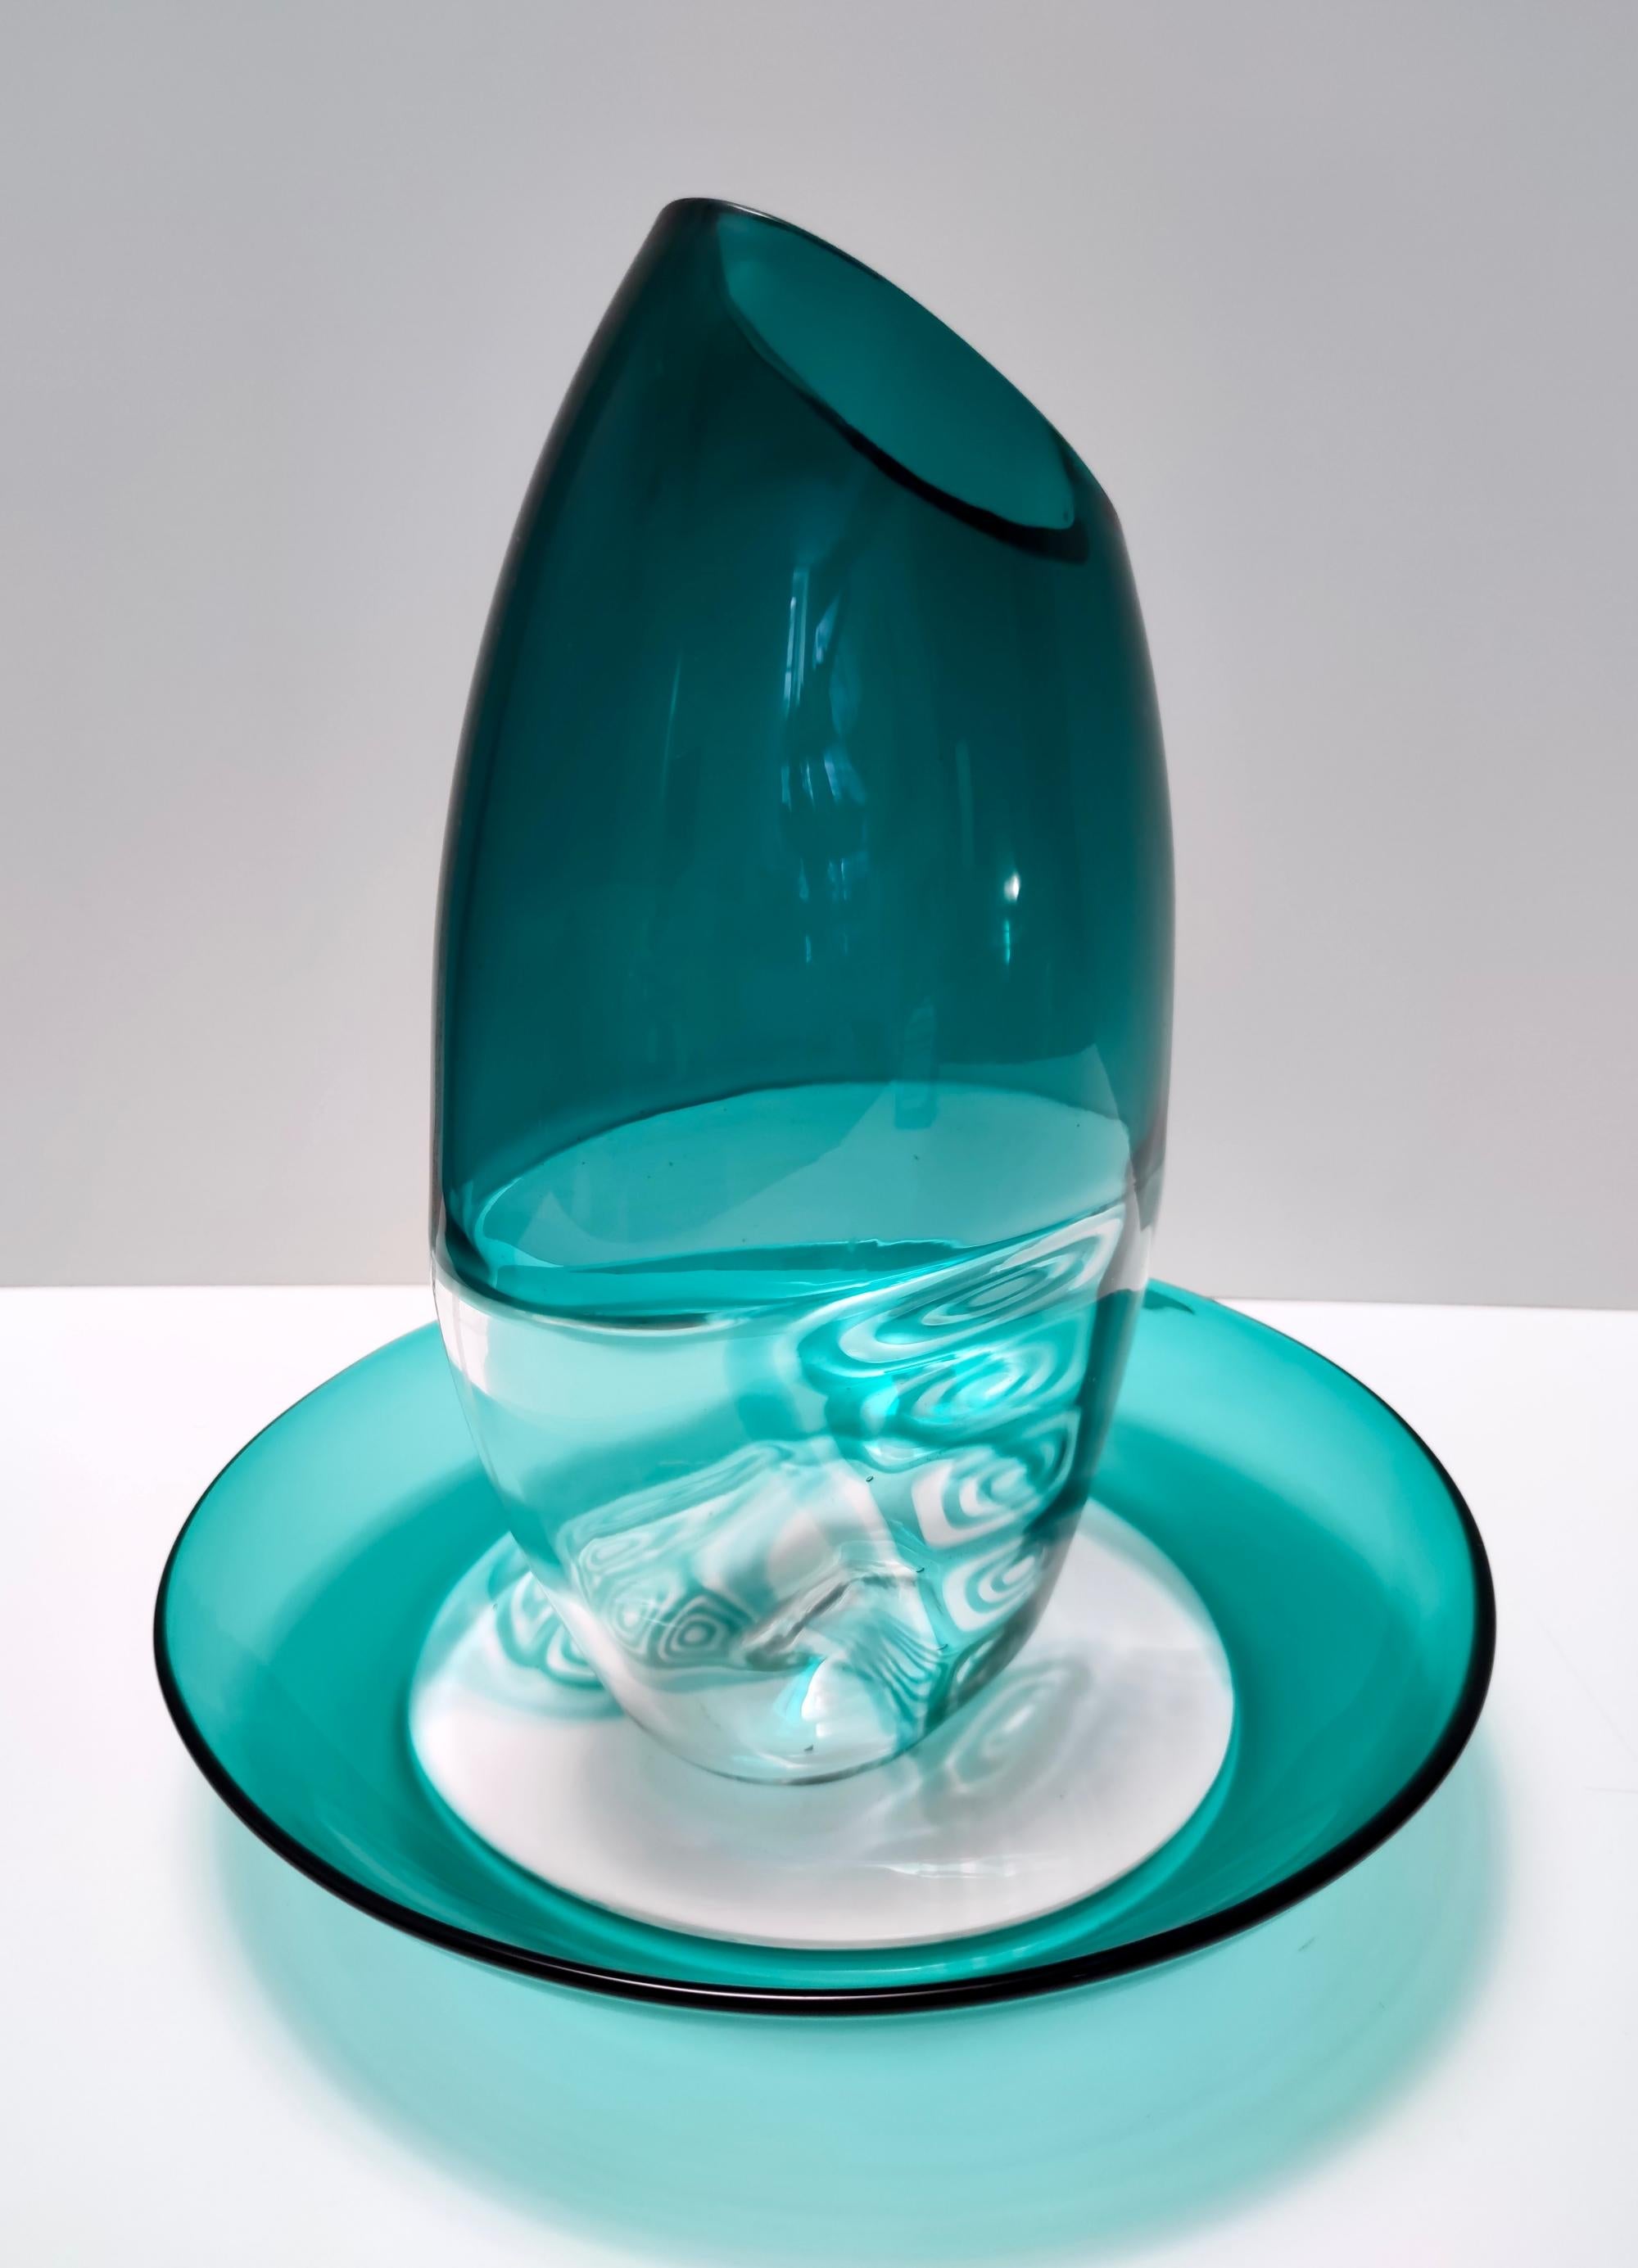 Postmodern Teal Murano Glass Plate and Vase by La Murrina, Italy In Excellent Condition For Sale In Bresso, Lombardy